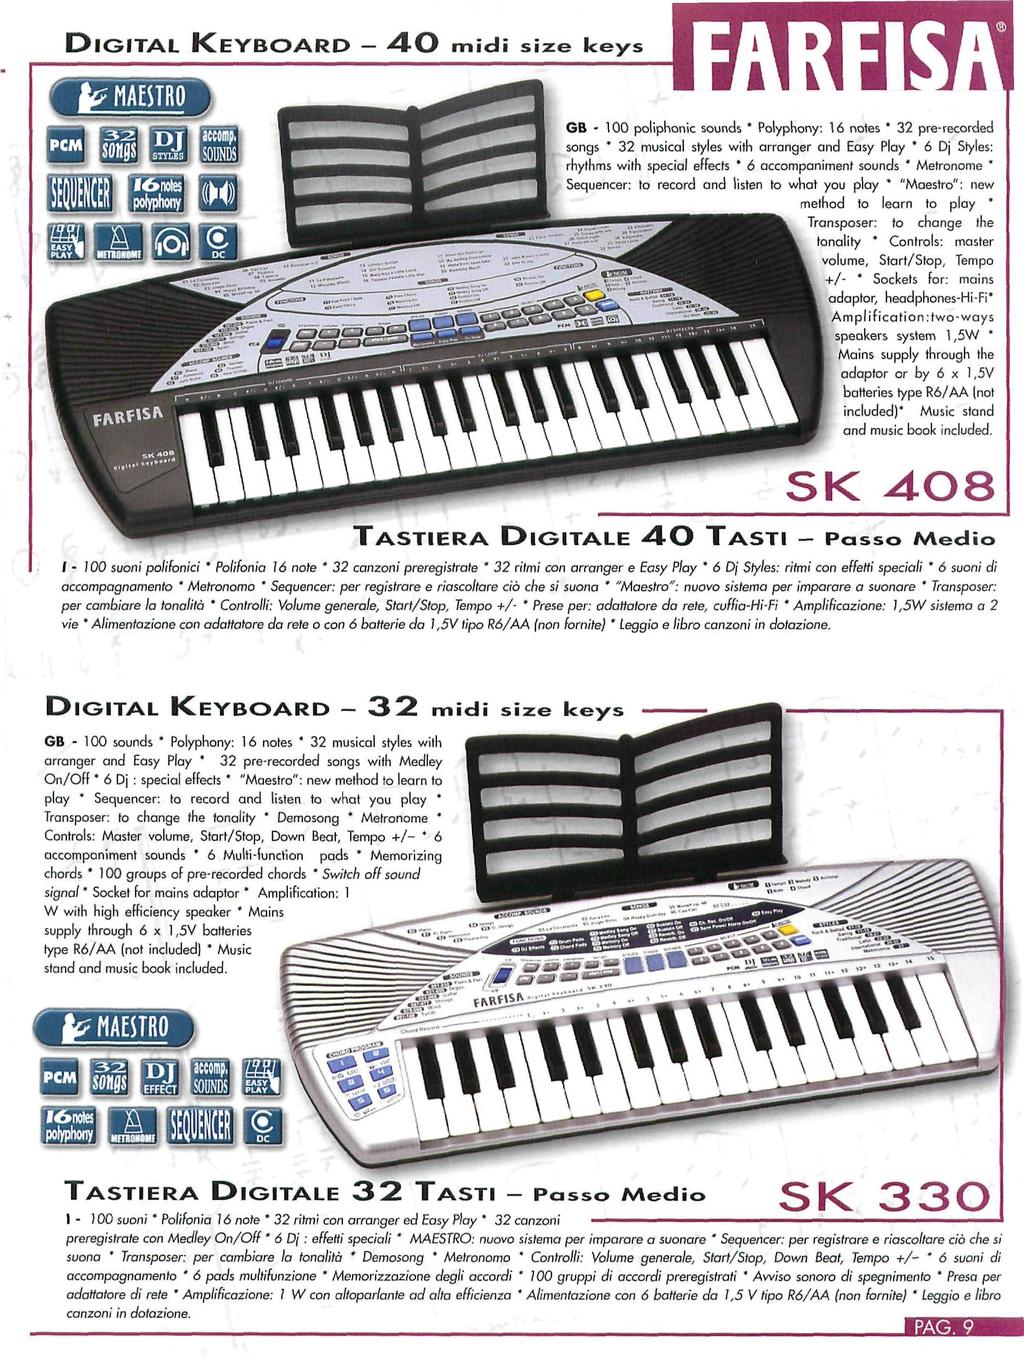 DIGITAL KEYBOARD - 4 0 midi size keys GB - 100 poliphonic sounds * Polyphony: 1 notes * pre-recorded songs * musical styles with arranger and Easy Play * Dj Styles: rhythms with special effects *